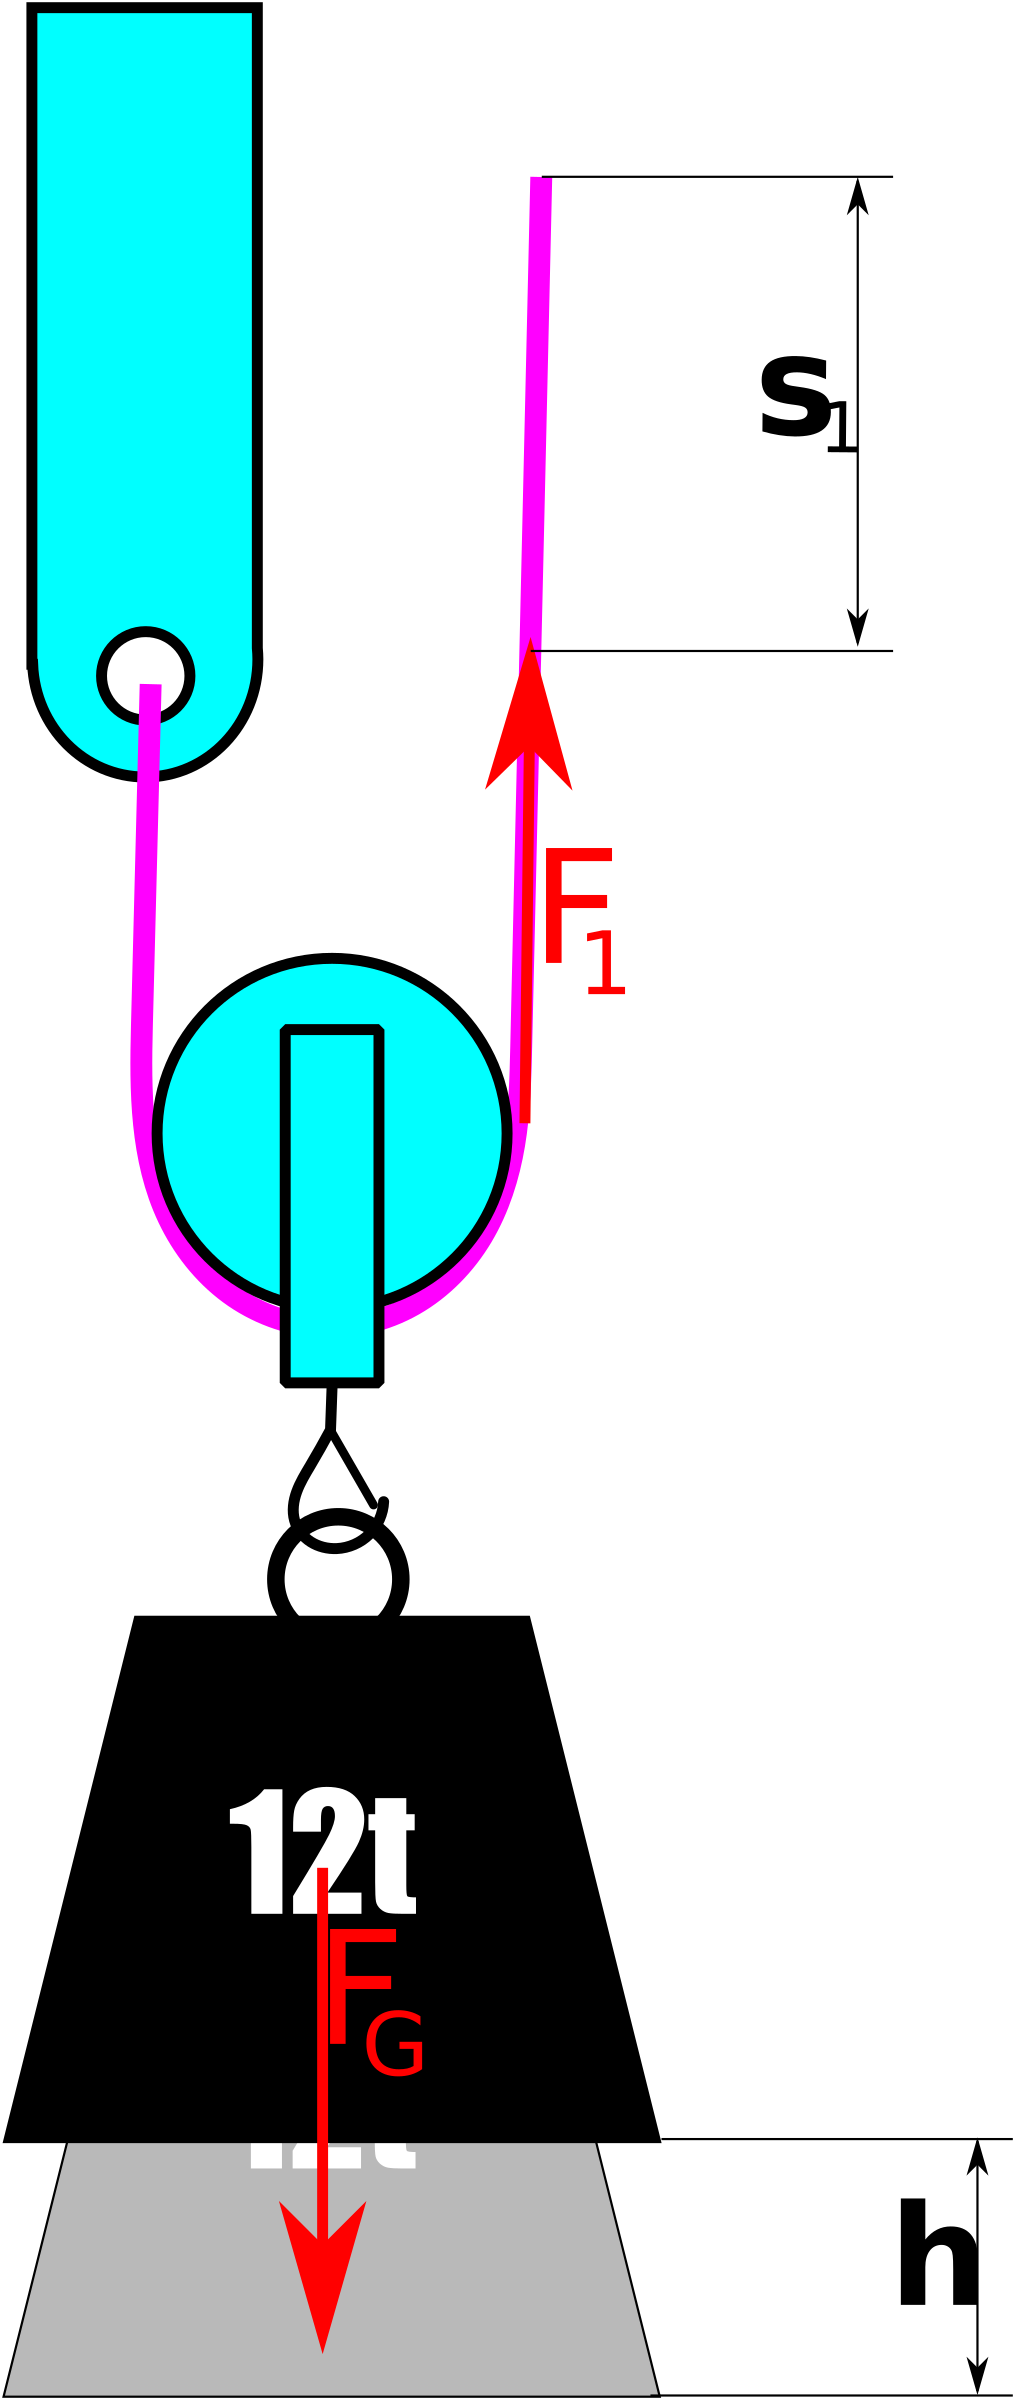 A Blue And Pink Diagram With Red Arrows